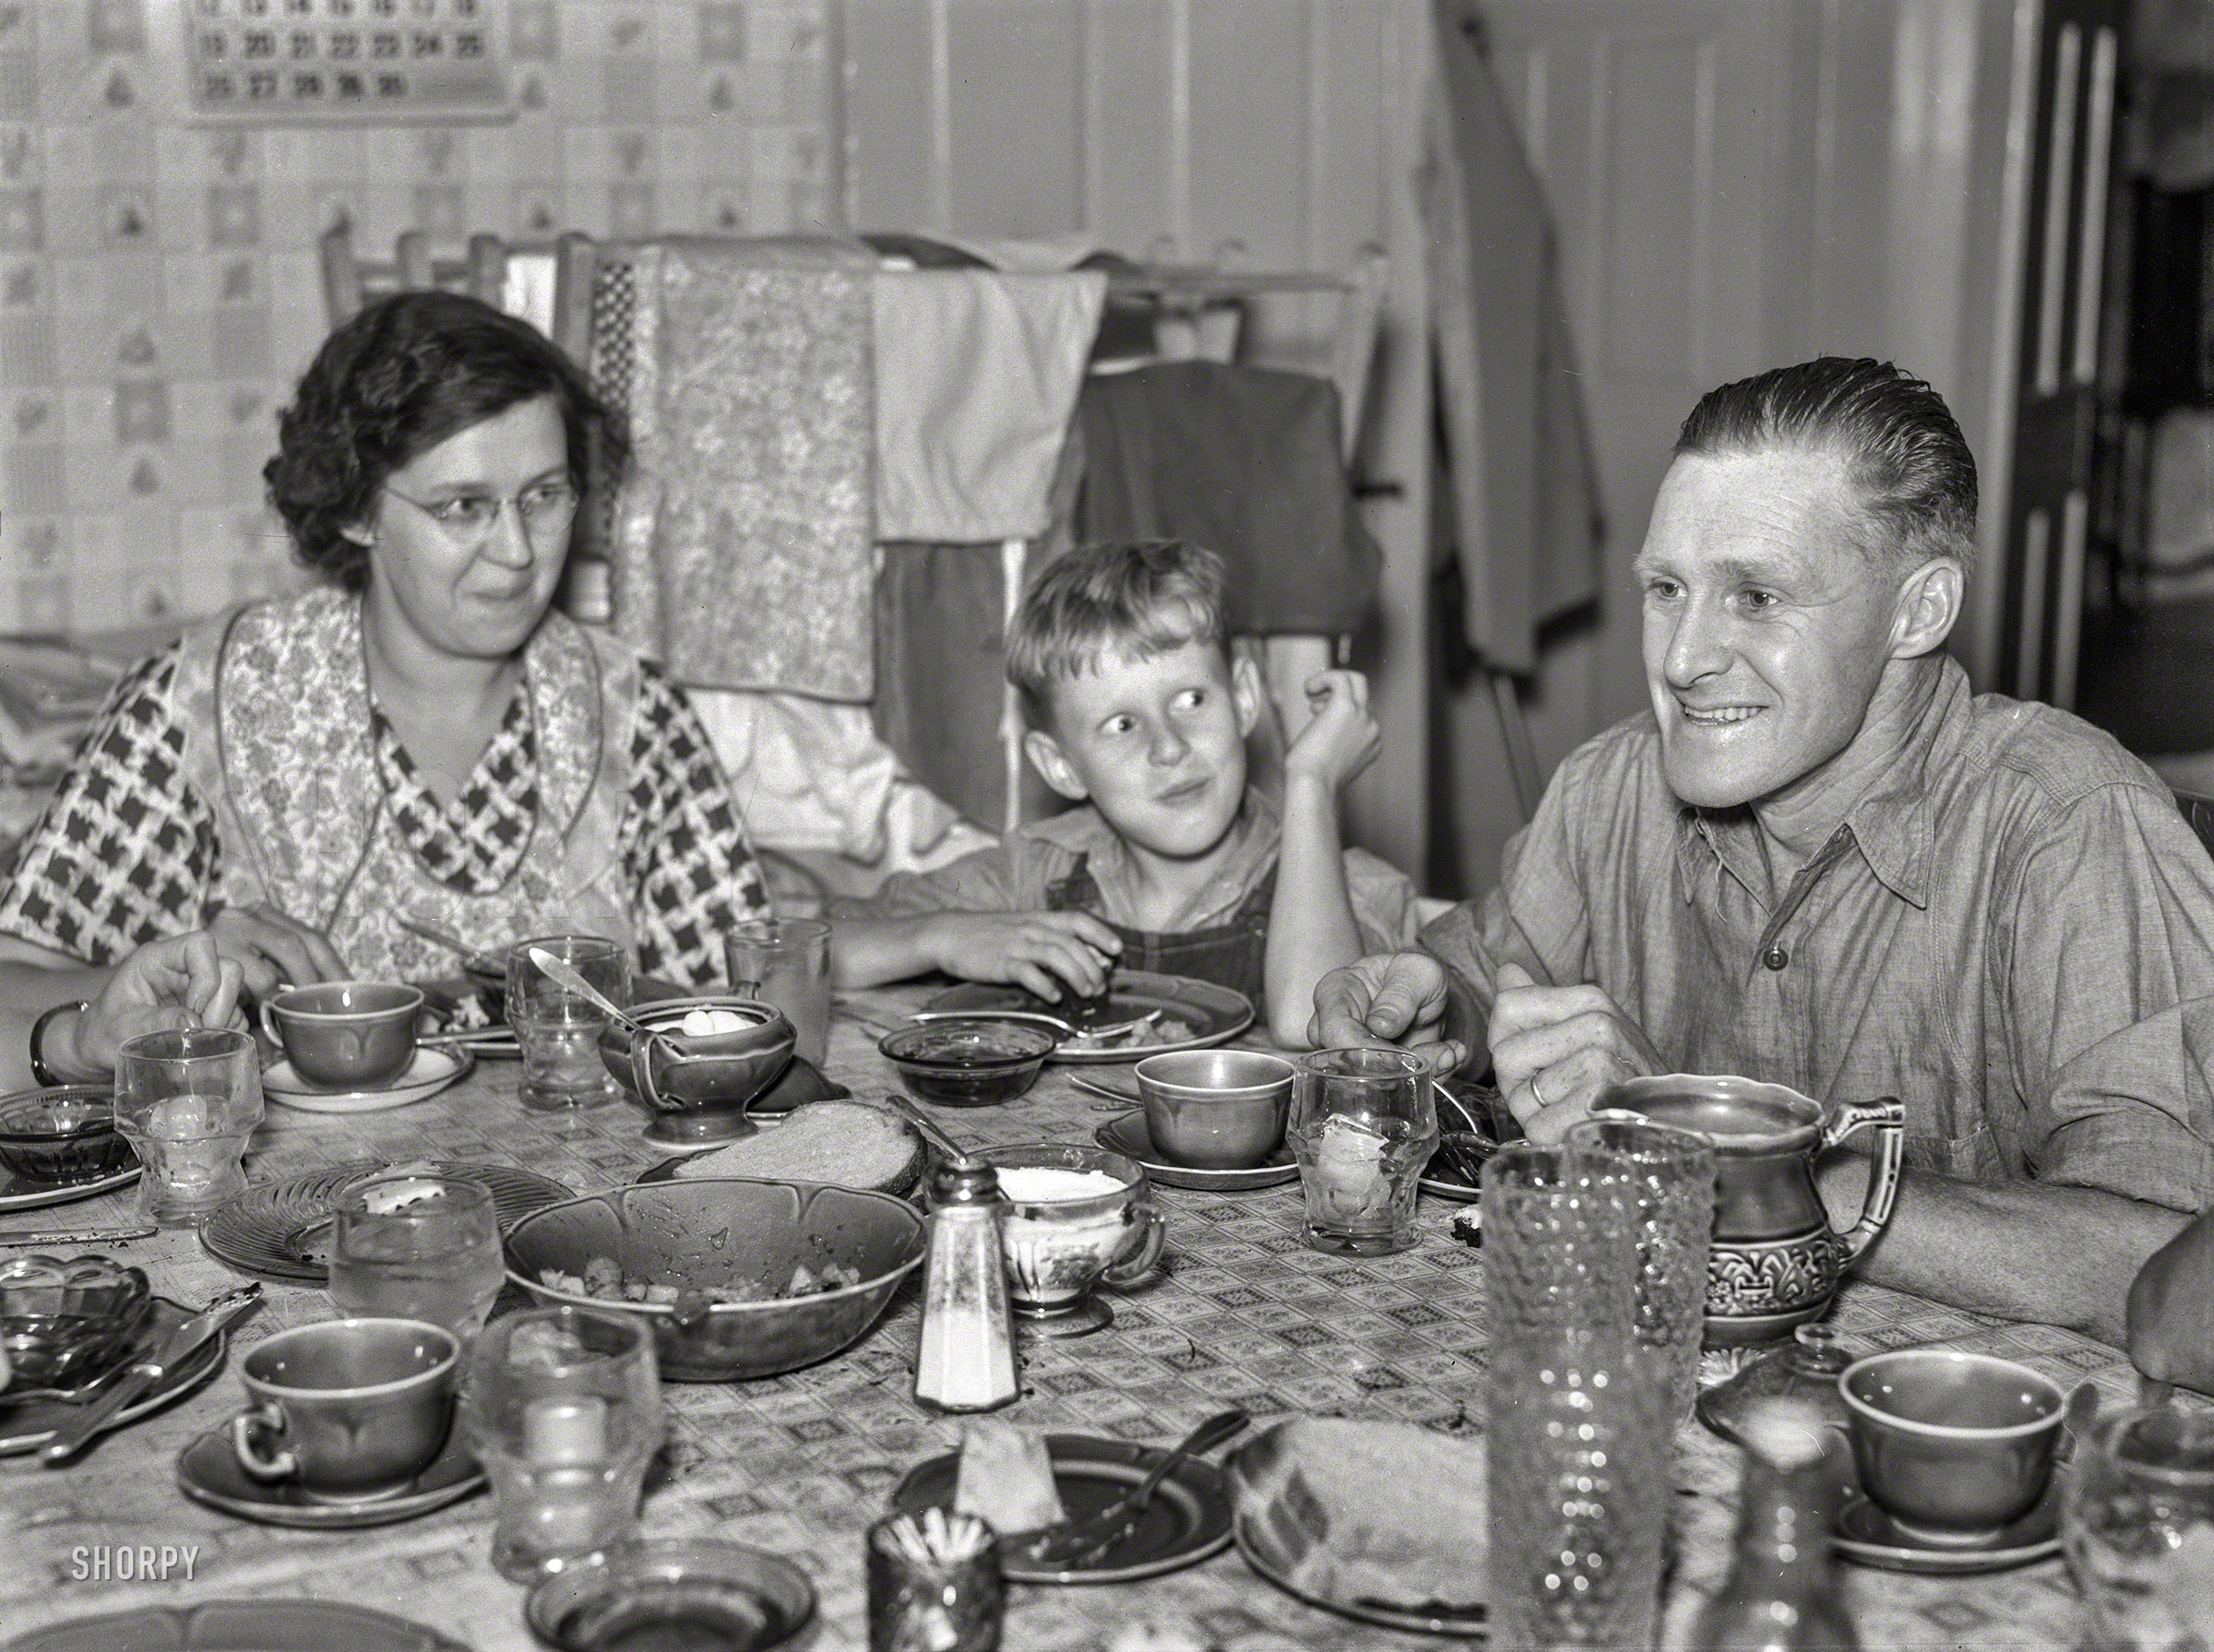 September 1937. "McNally family dairy farm in Kirby, Vermont. The McNallys at dinner." Photo by Arthur Rothstein for the Farm Security Admin. View full size.